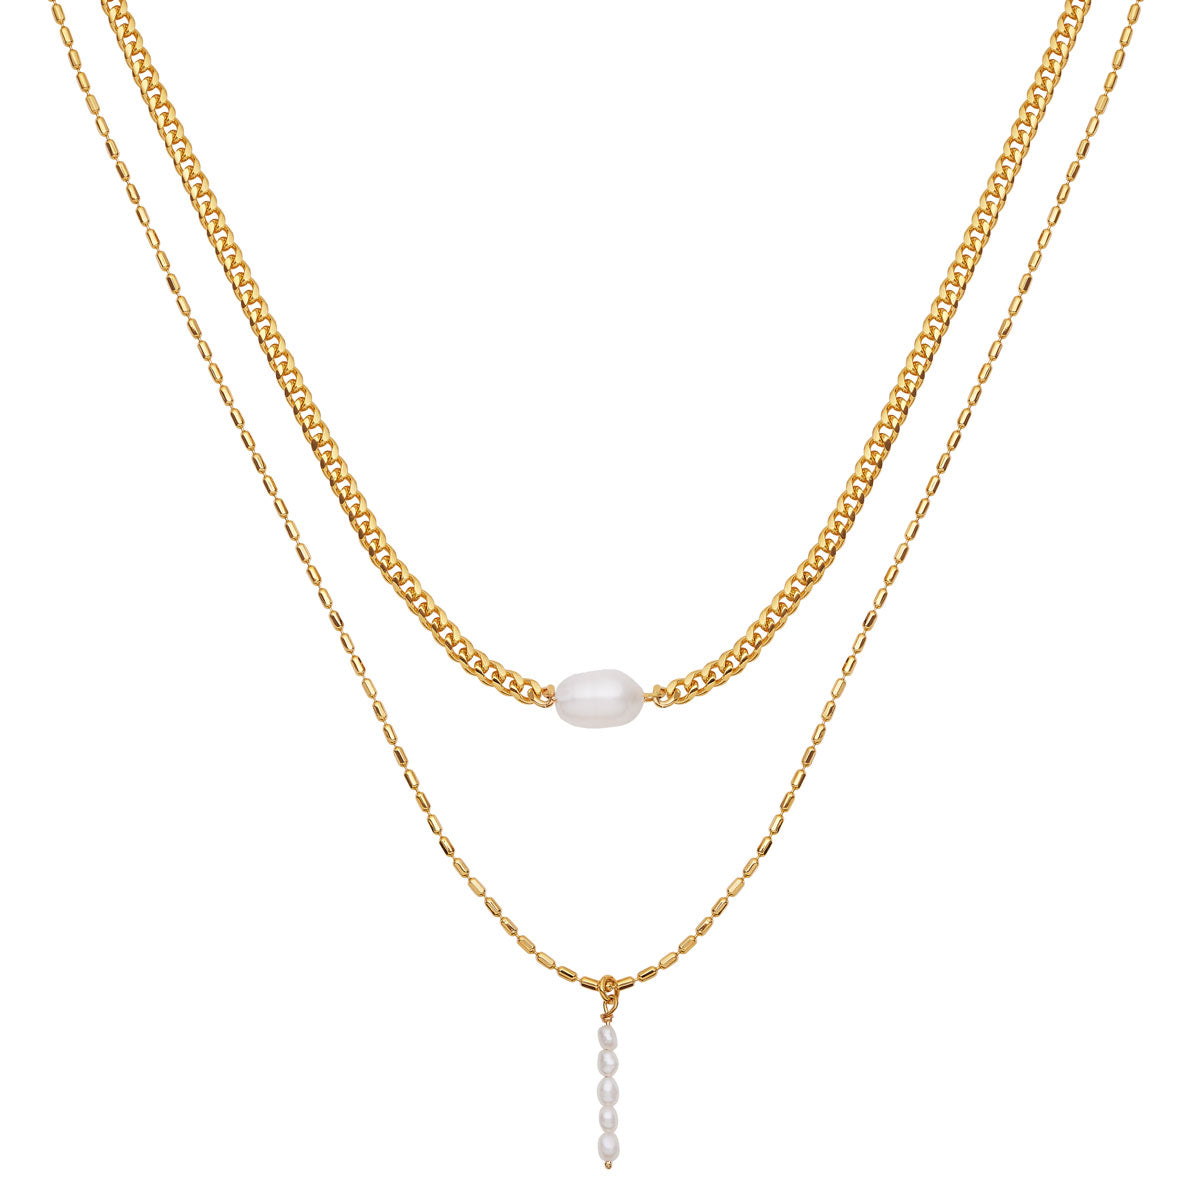 Effie Necklace with pearls - Mount Longboards 